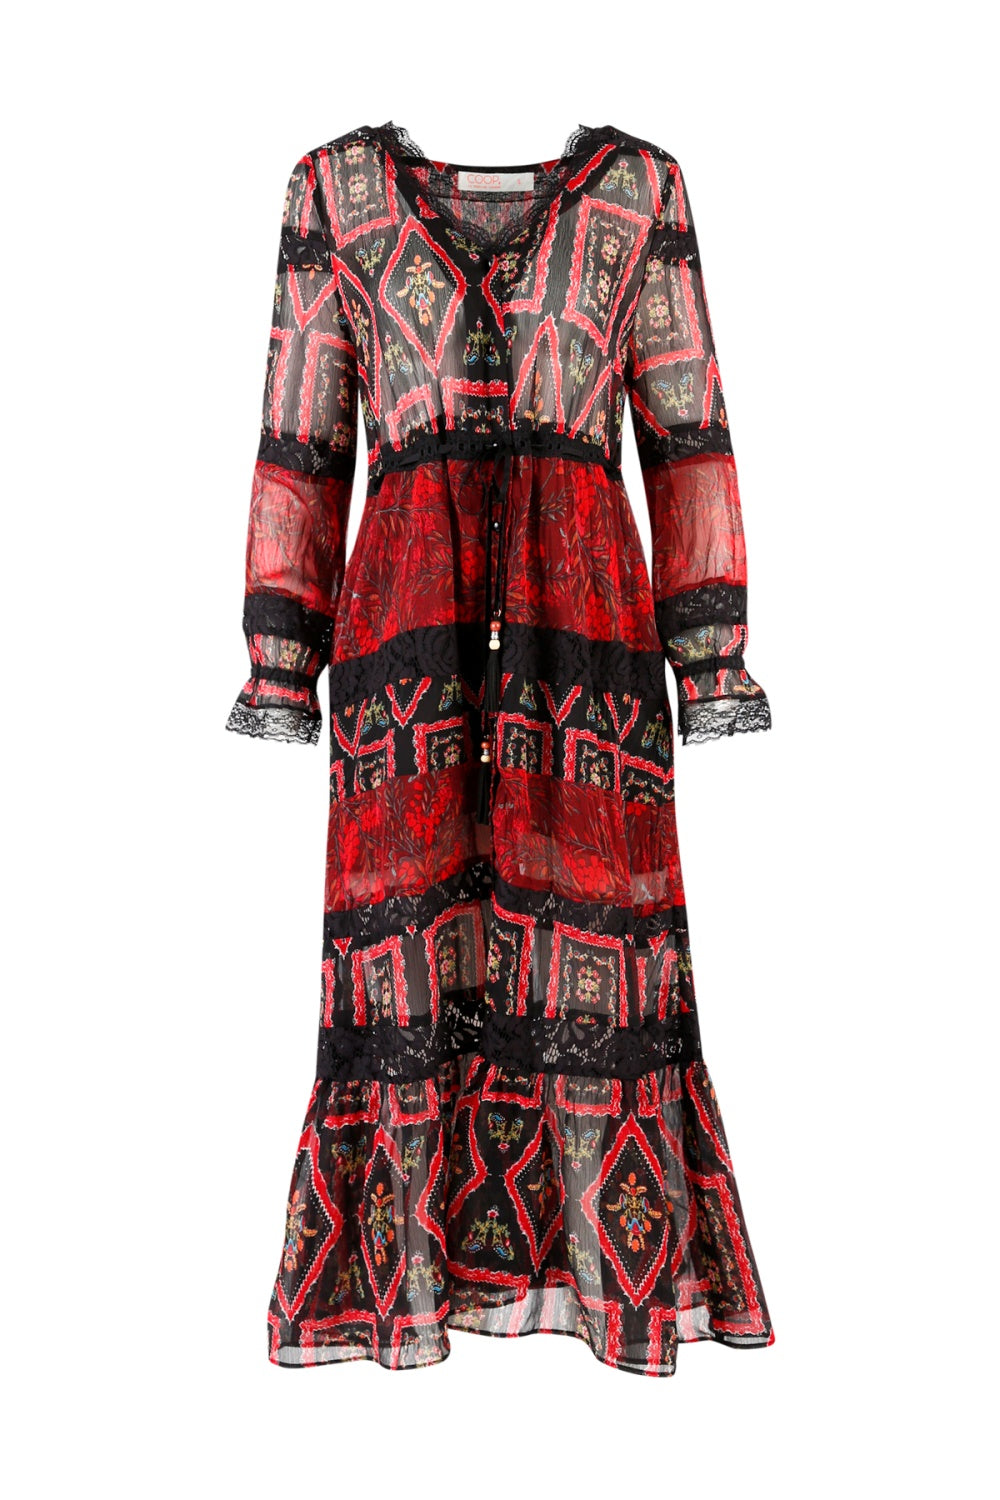 TOTAL CONTRAST DRESS RED HOT